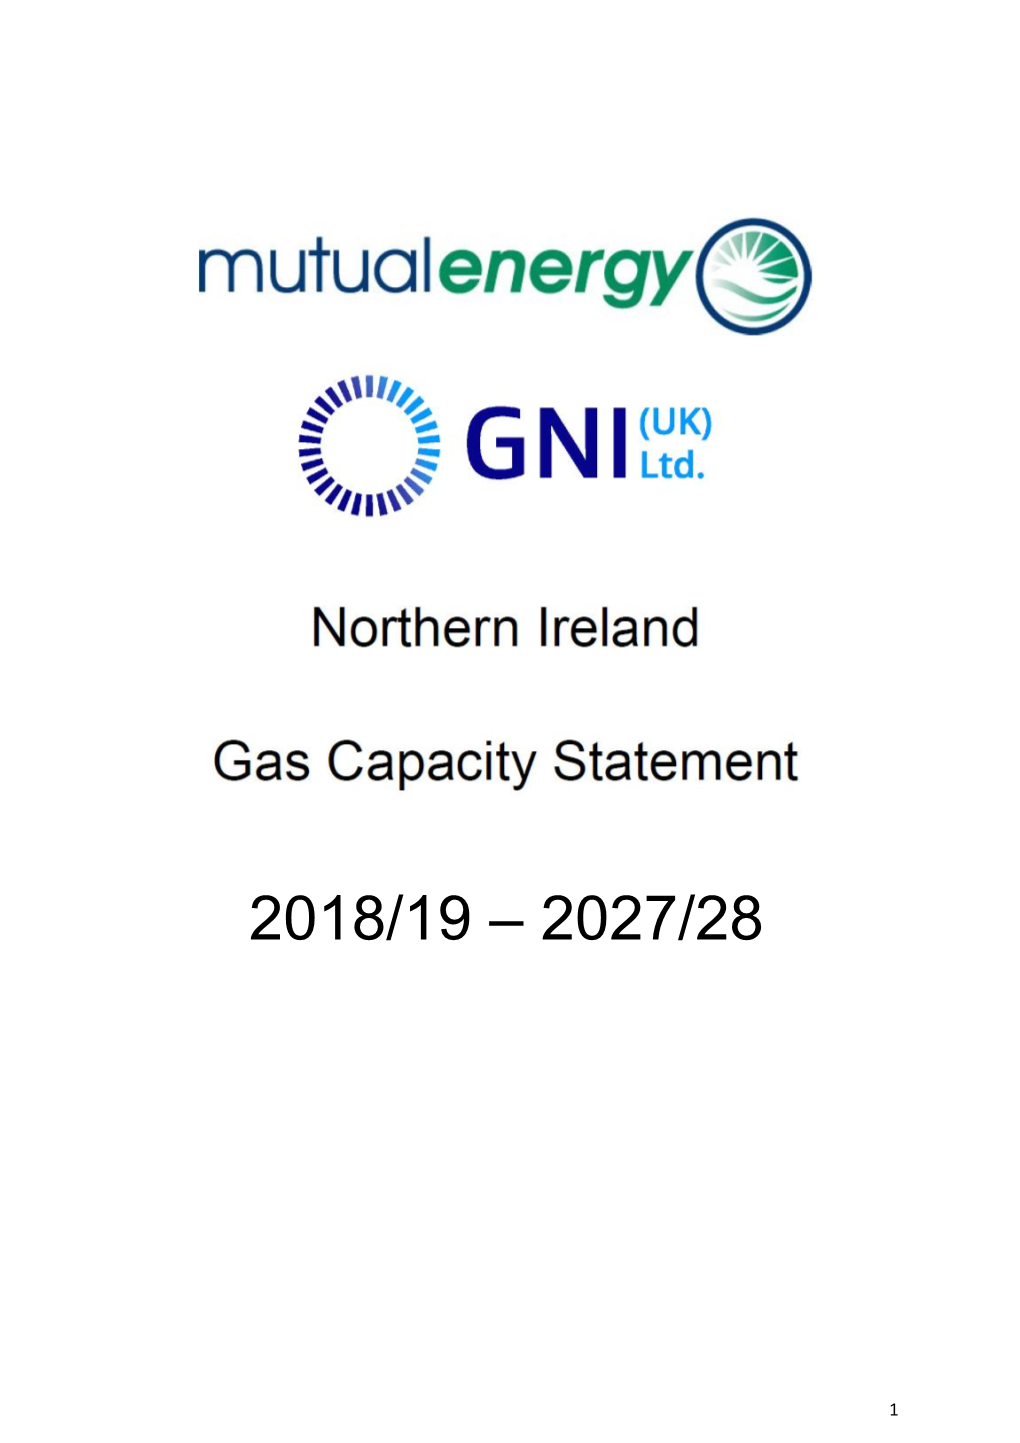 Link to Gas Capacity